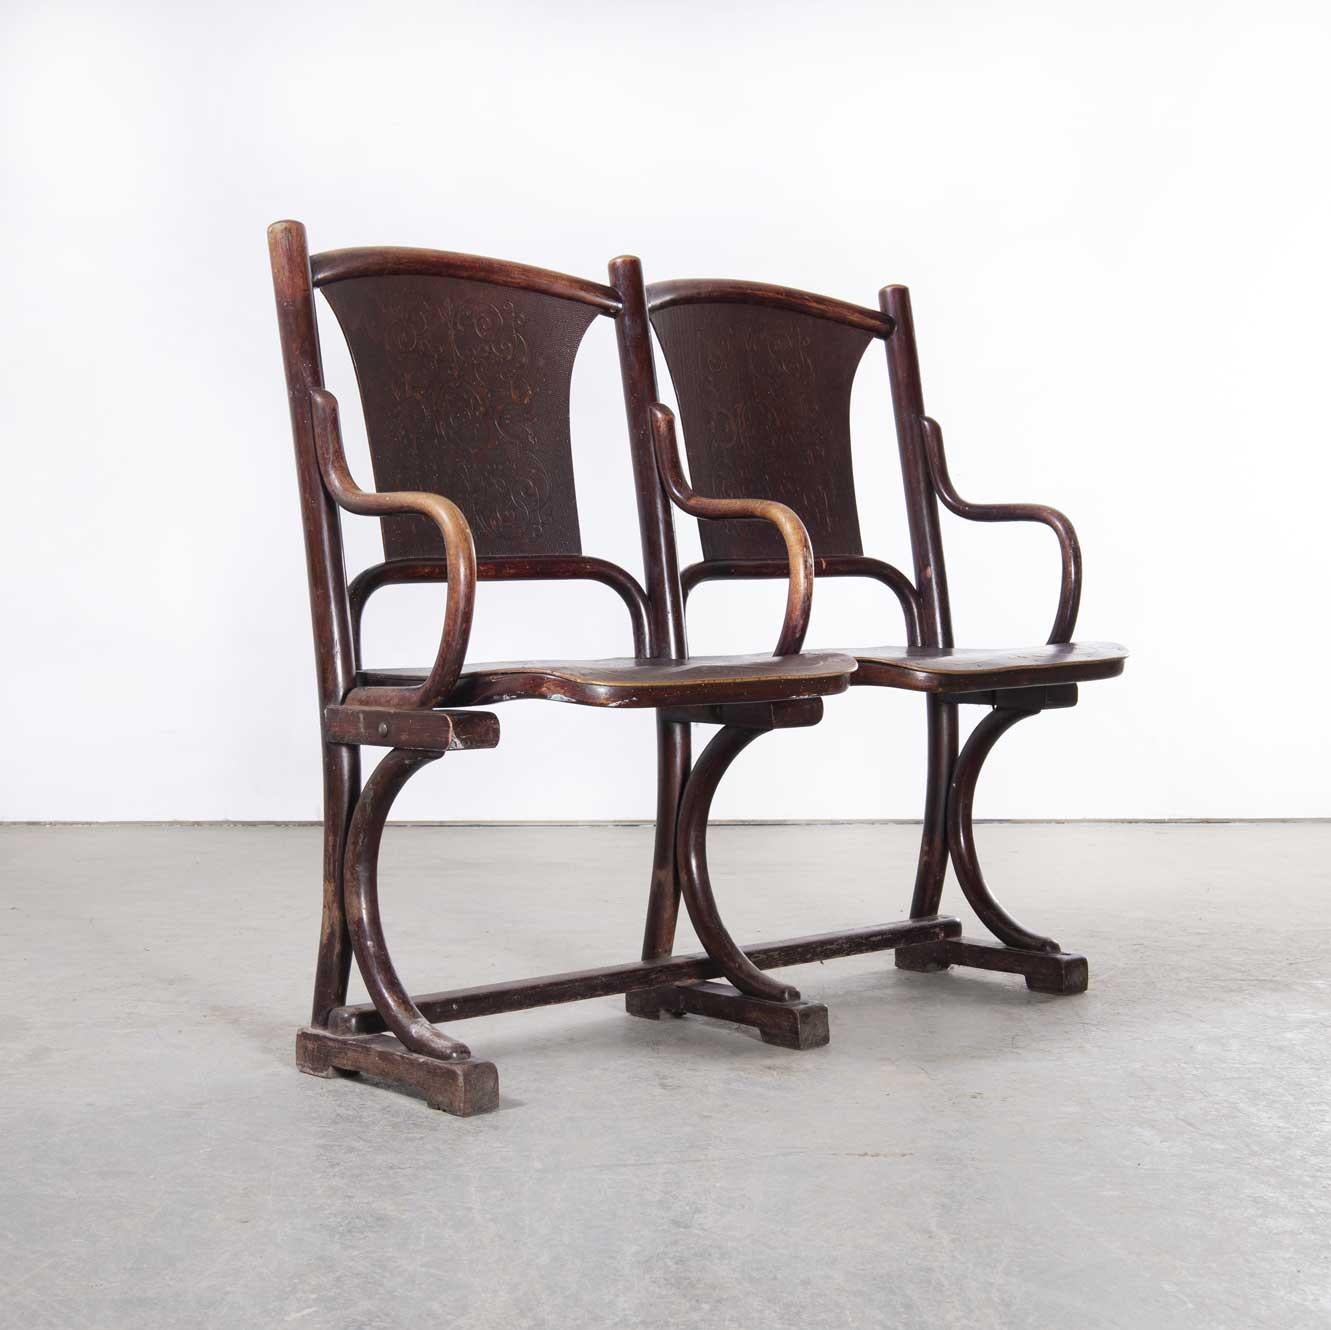 19th Century Thonet Original Theatre Seats (1717.1)
19th Century Thonet Original Theatre Seats. Founded in the early 19th Century by Michael Thonet, Thonet invented the process of steam bending wood under pressure and used this to design the